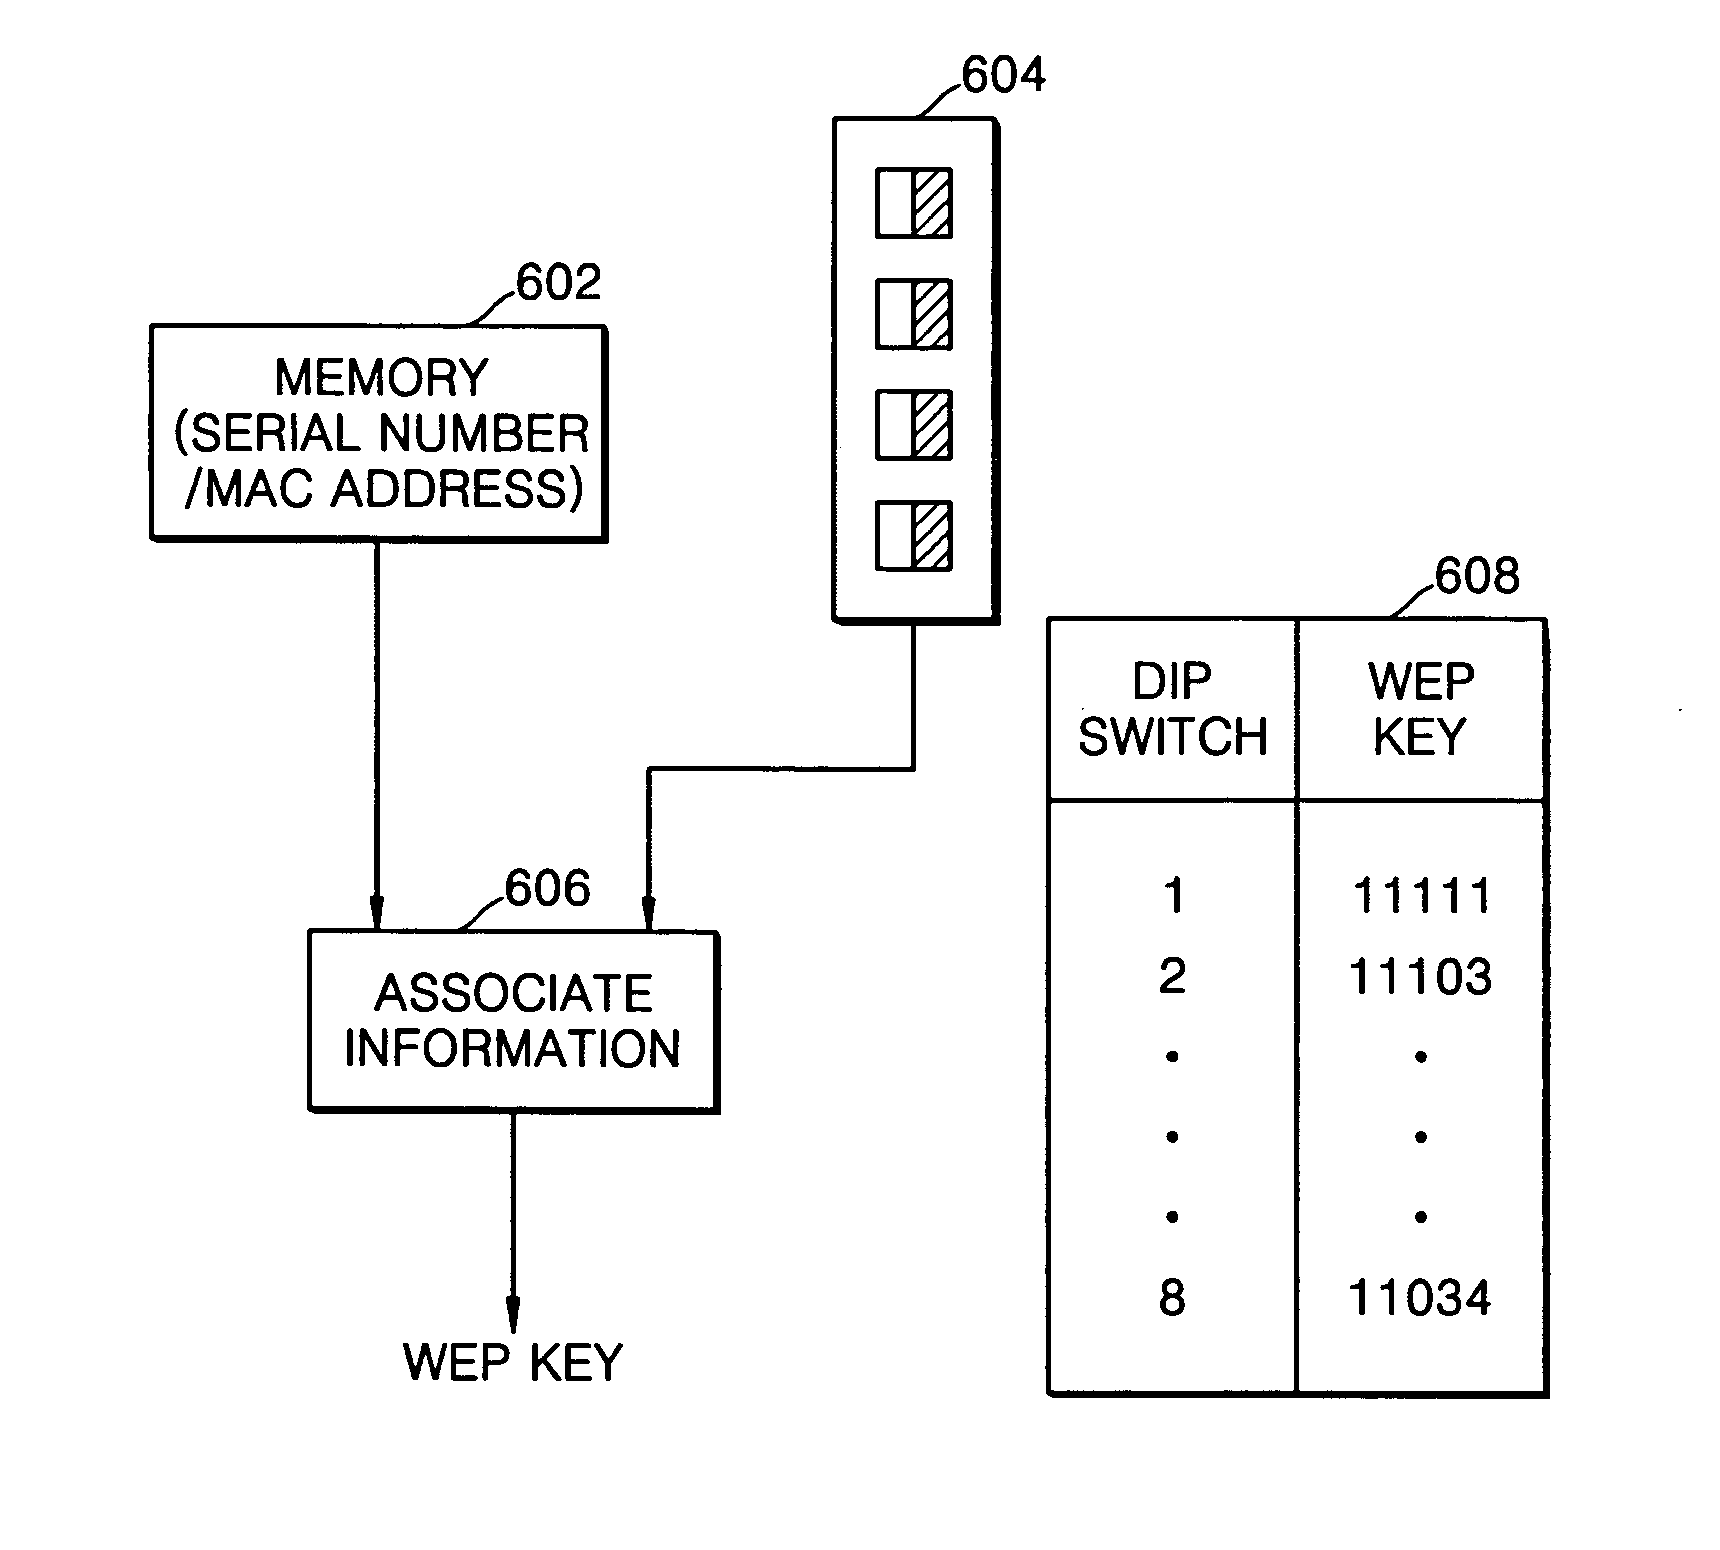 Method of generating an encryption key without use of an input device, and apparatus therefor